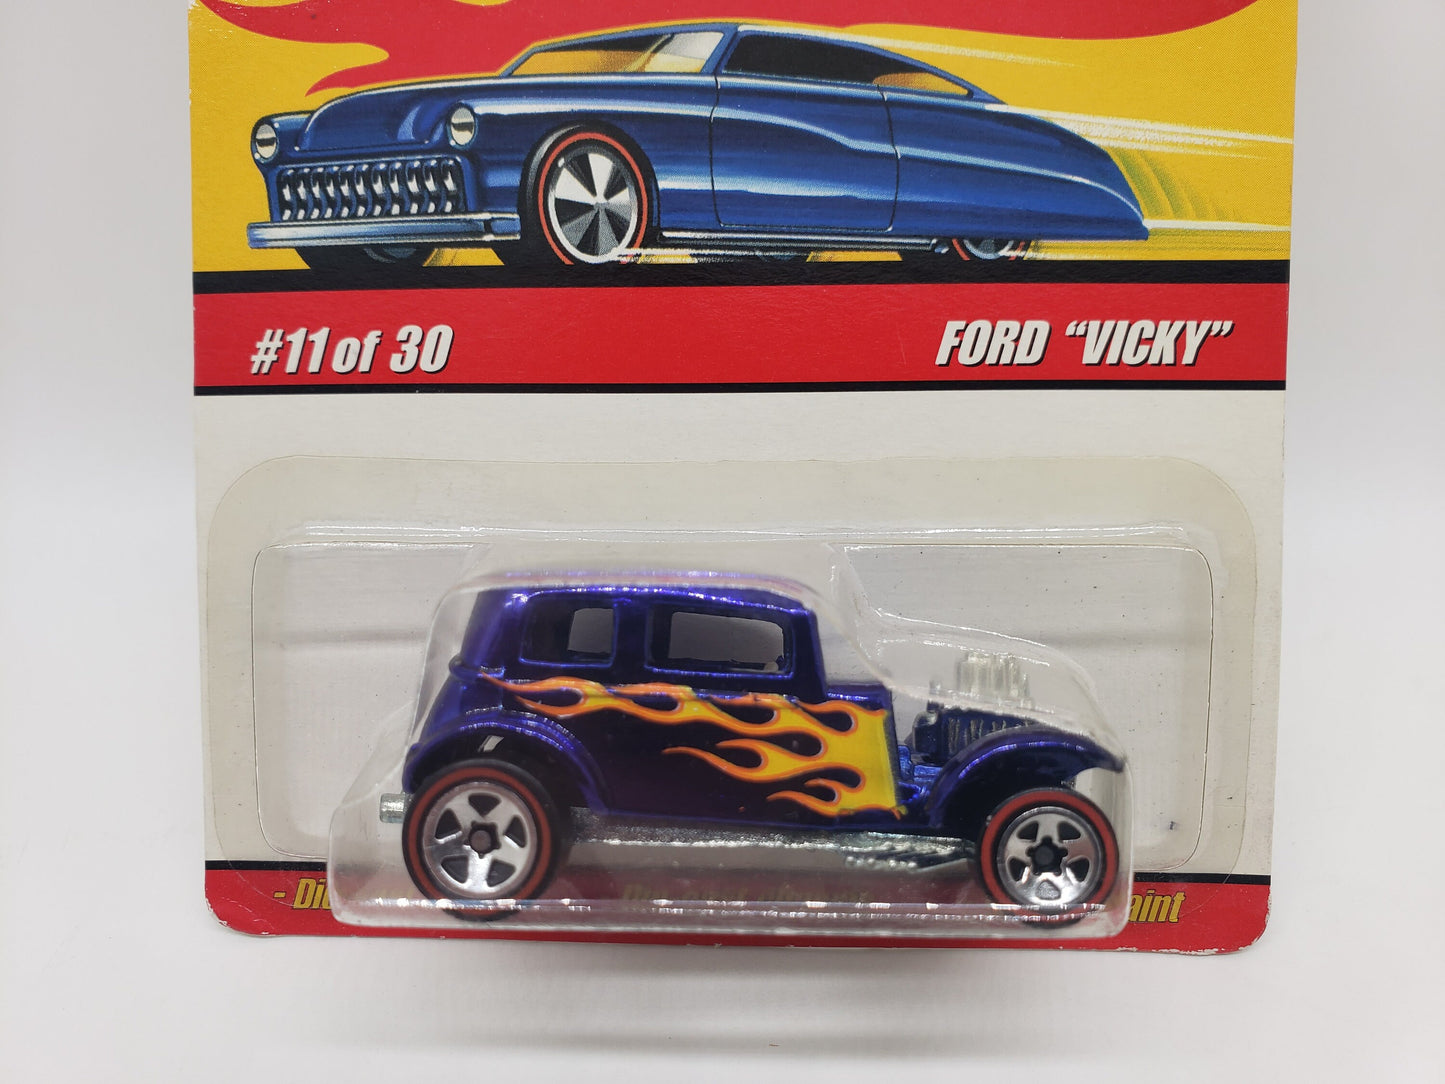 Hot Wheels Ford Vicky Purple Classics Series 3 Miniature Collectible Scale Model Toy Car Perfect Birthday Gift